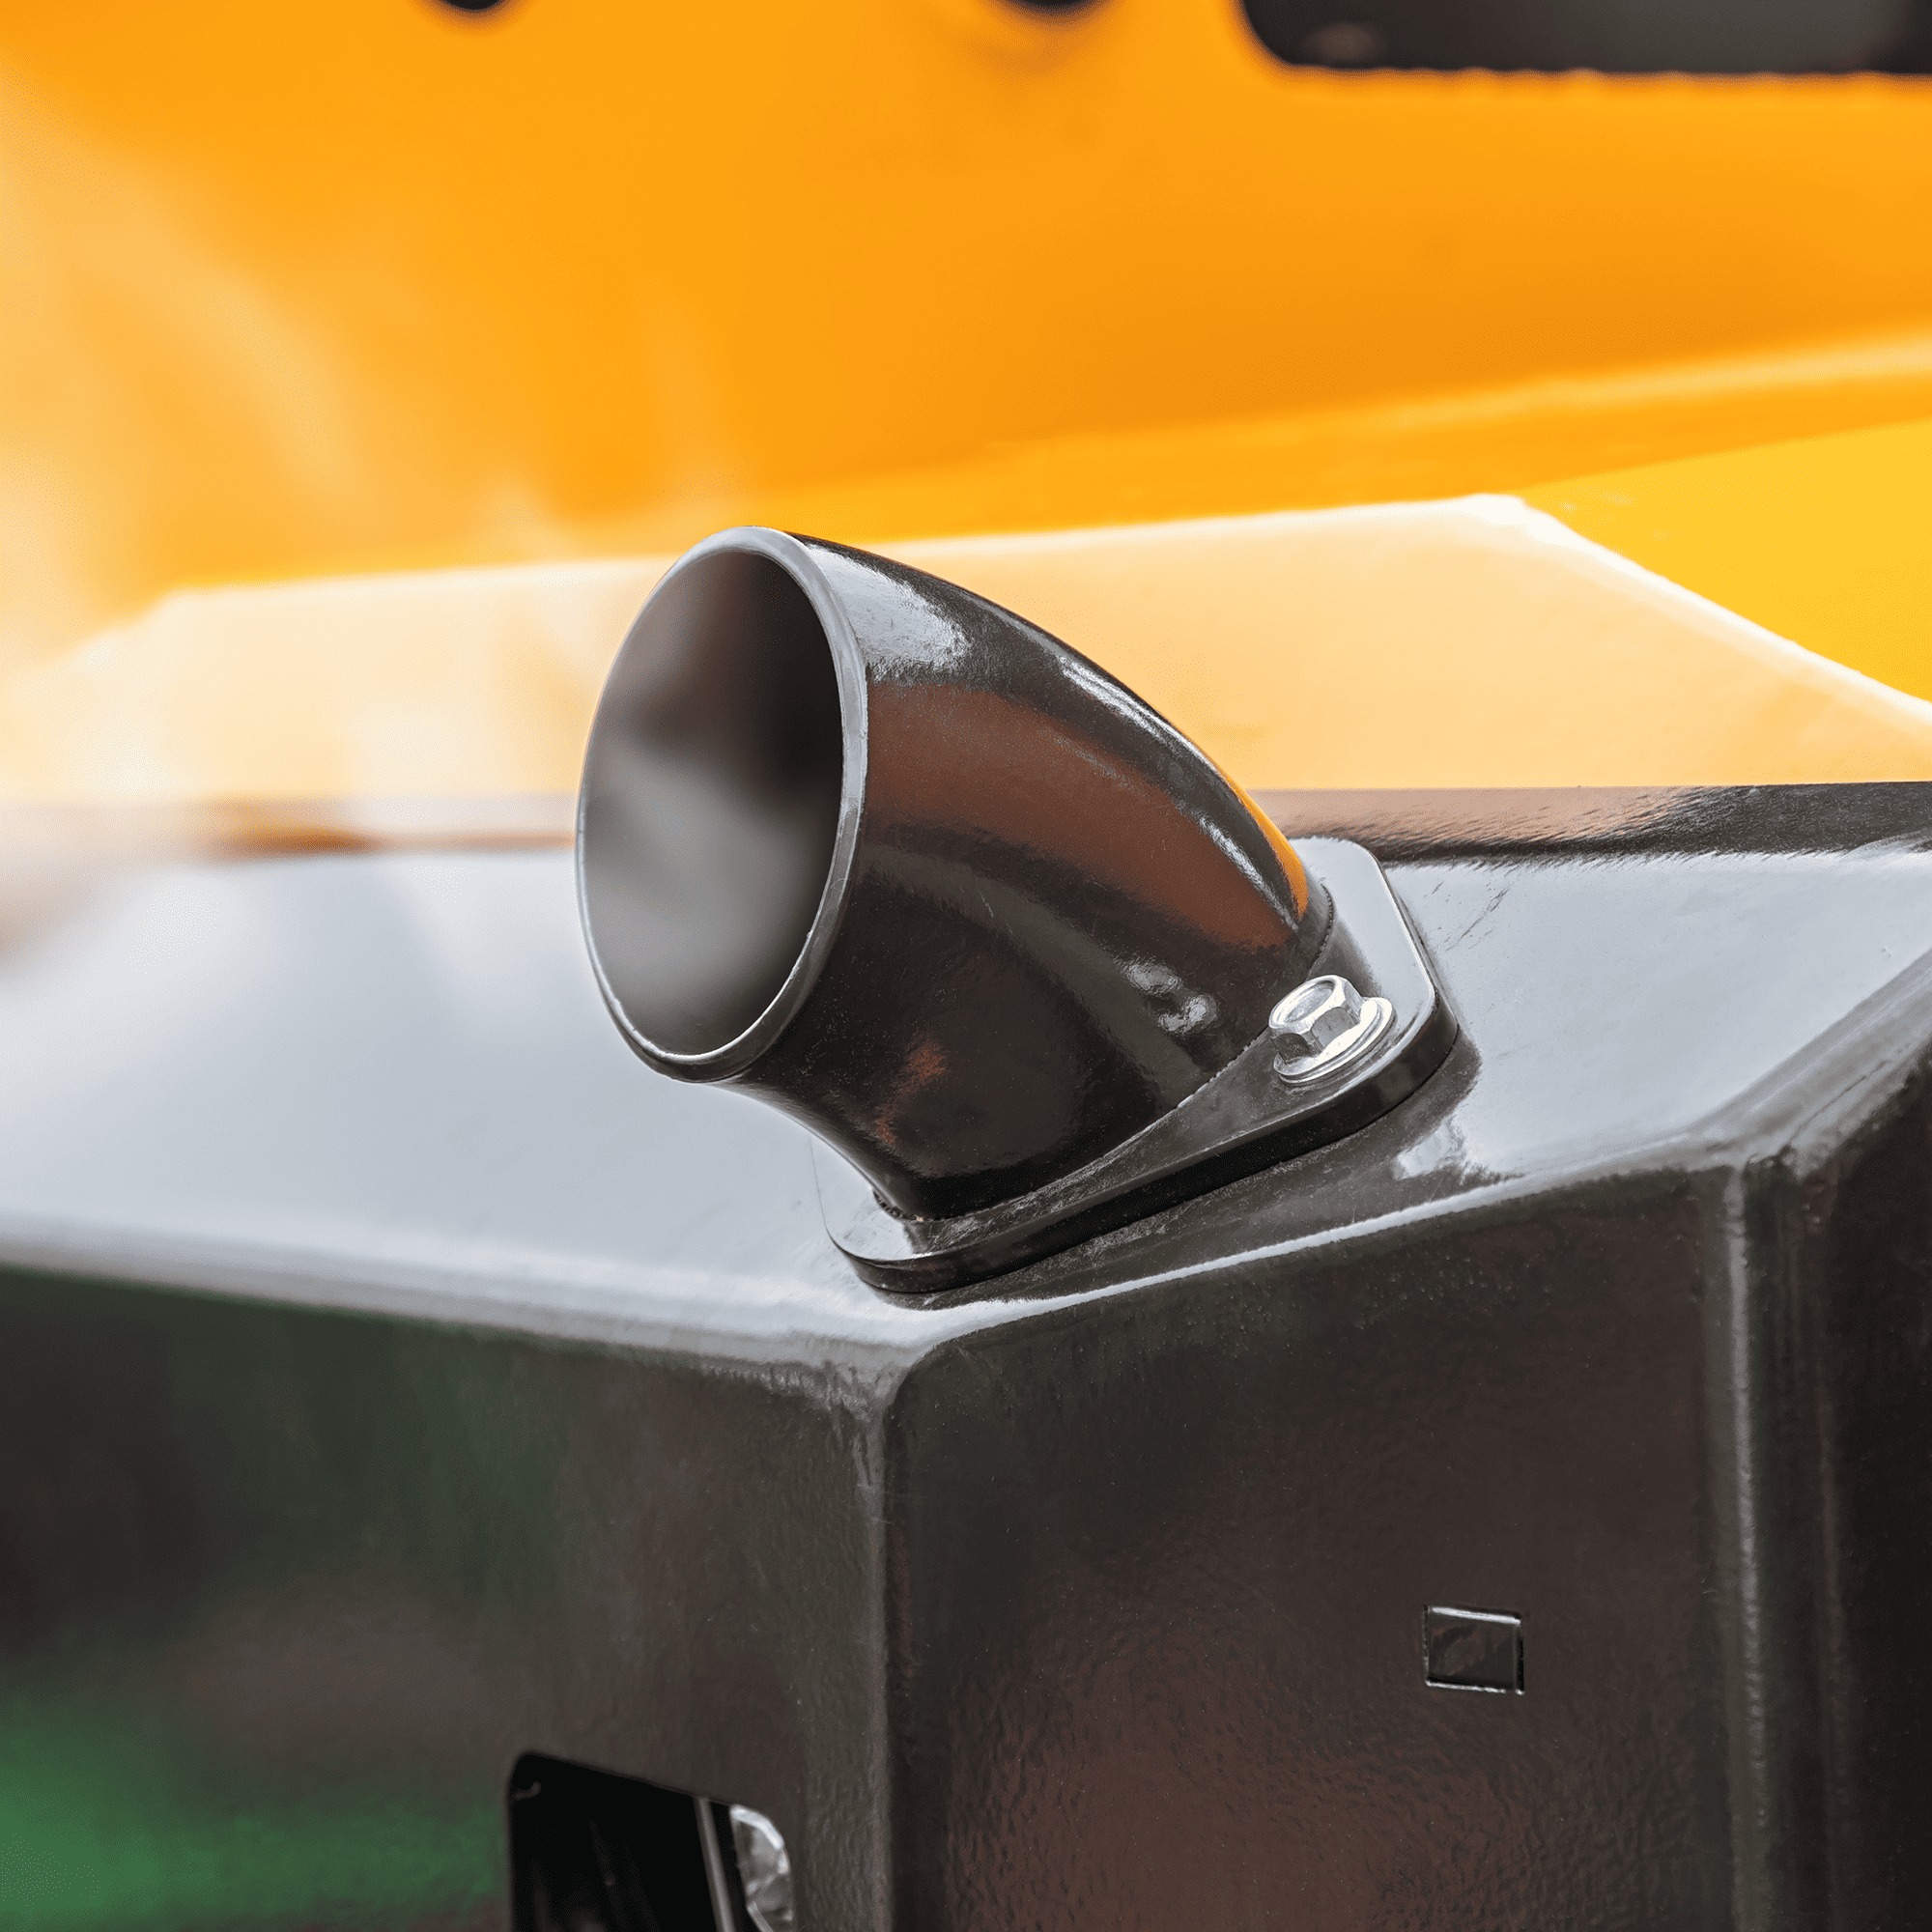 A close up of a heavy equipment exhaust pipe